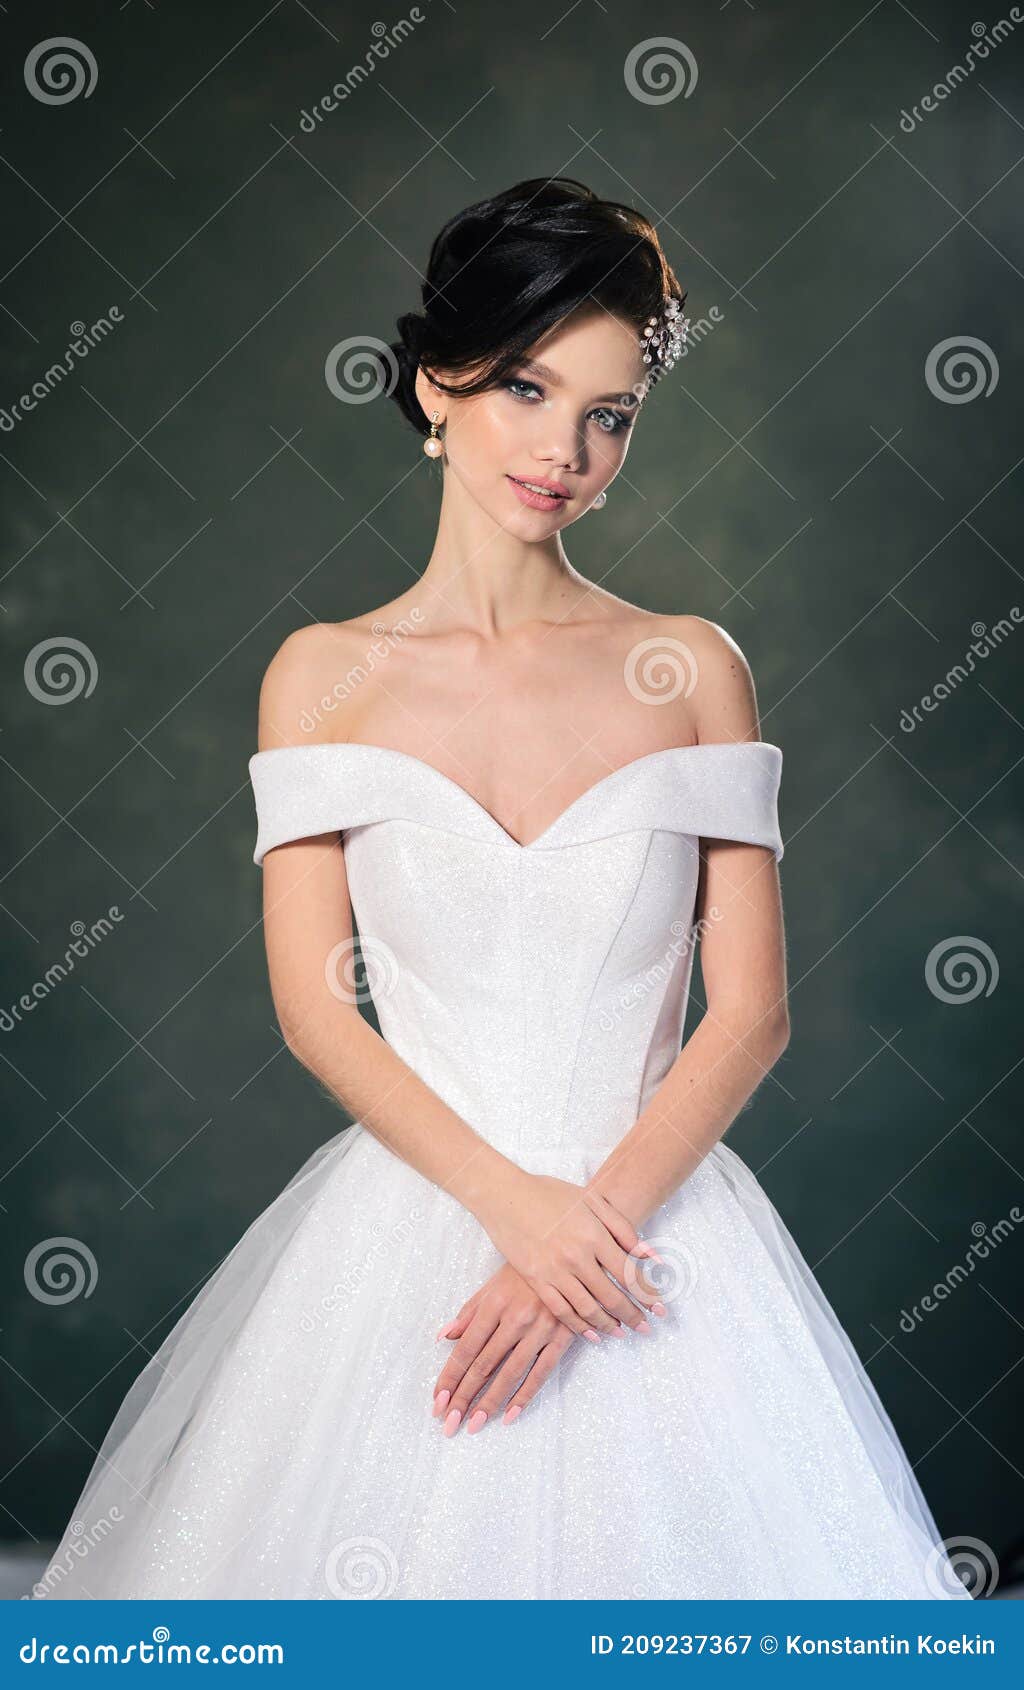 Bride in lingerie dancing with her wedding dress. White boudoir dress.  Morning preparations indoors. Luxury bride with hairstyle and makeup in a  hotel or apartment. Woman in white night gown and veil